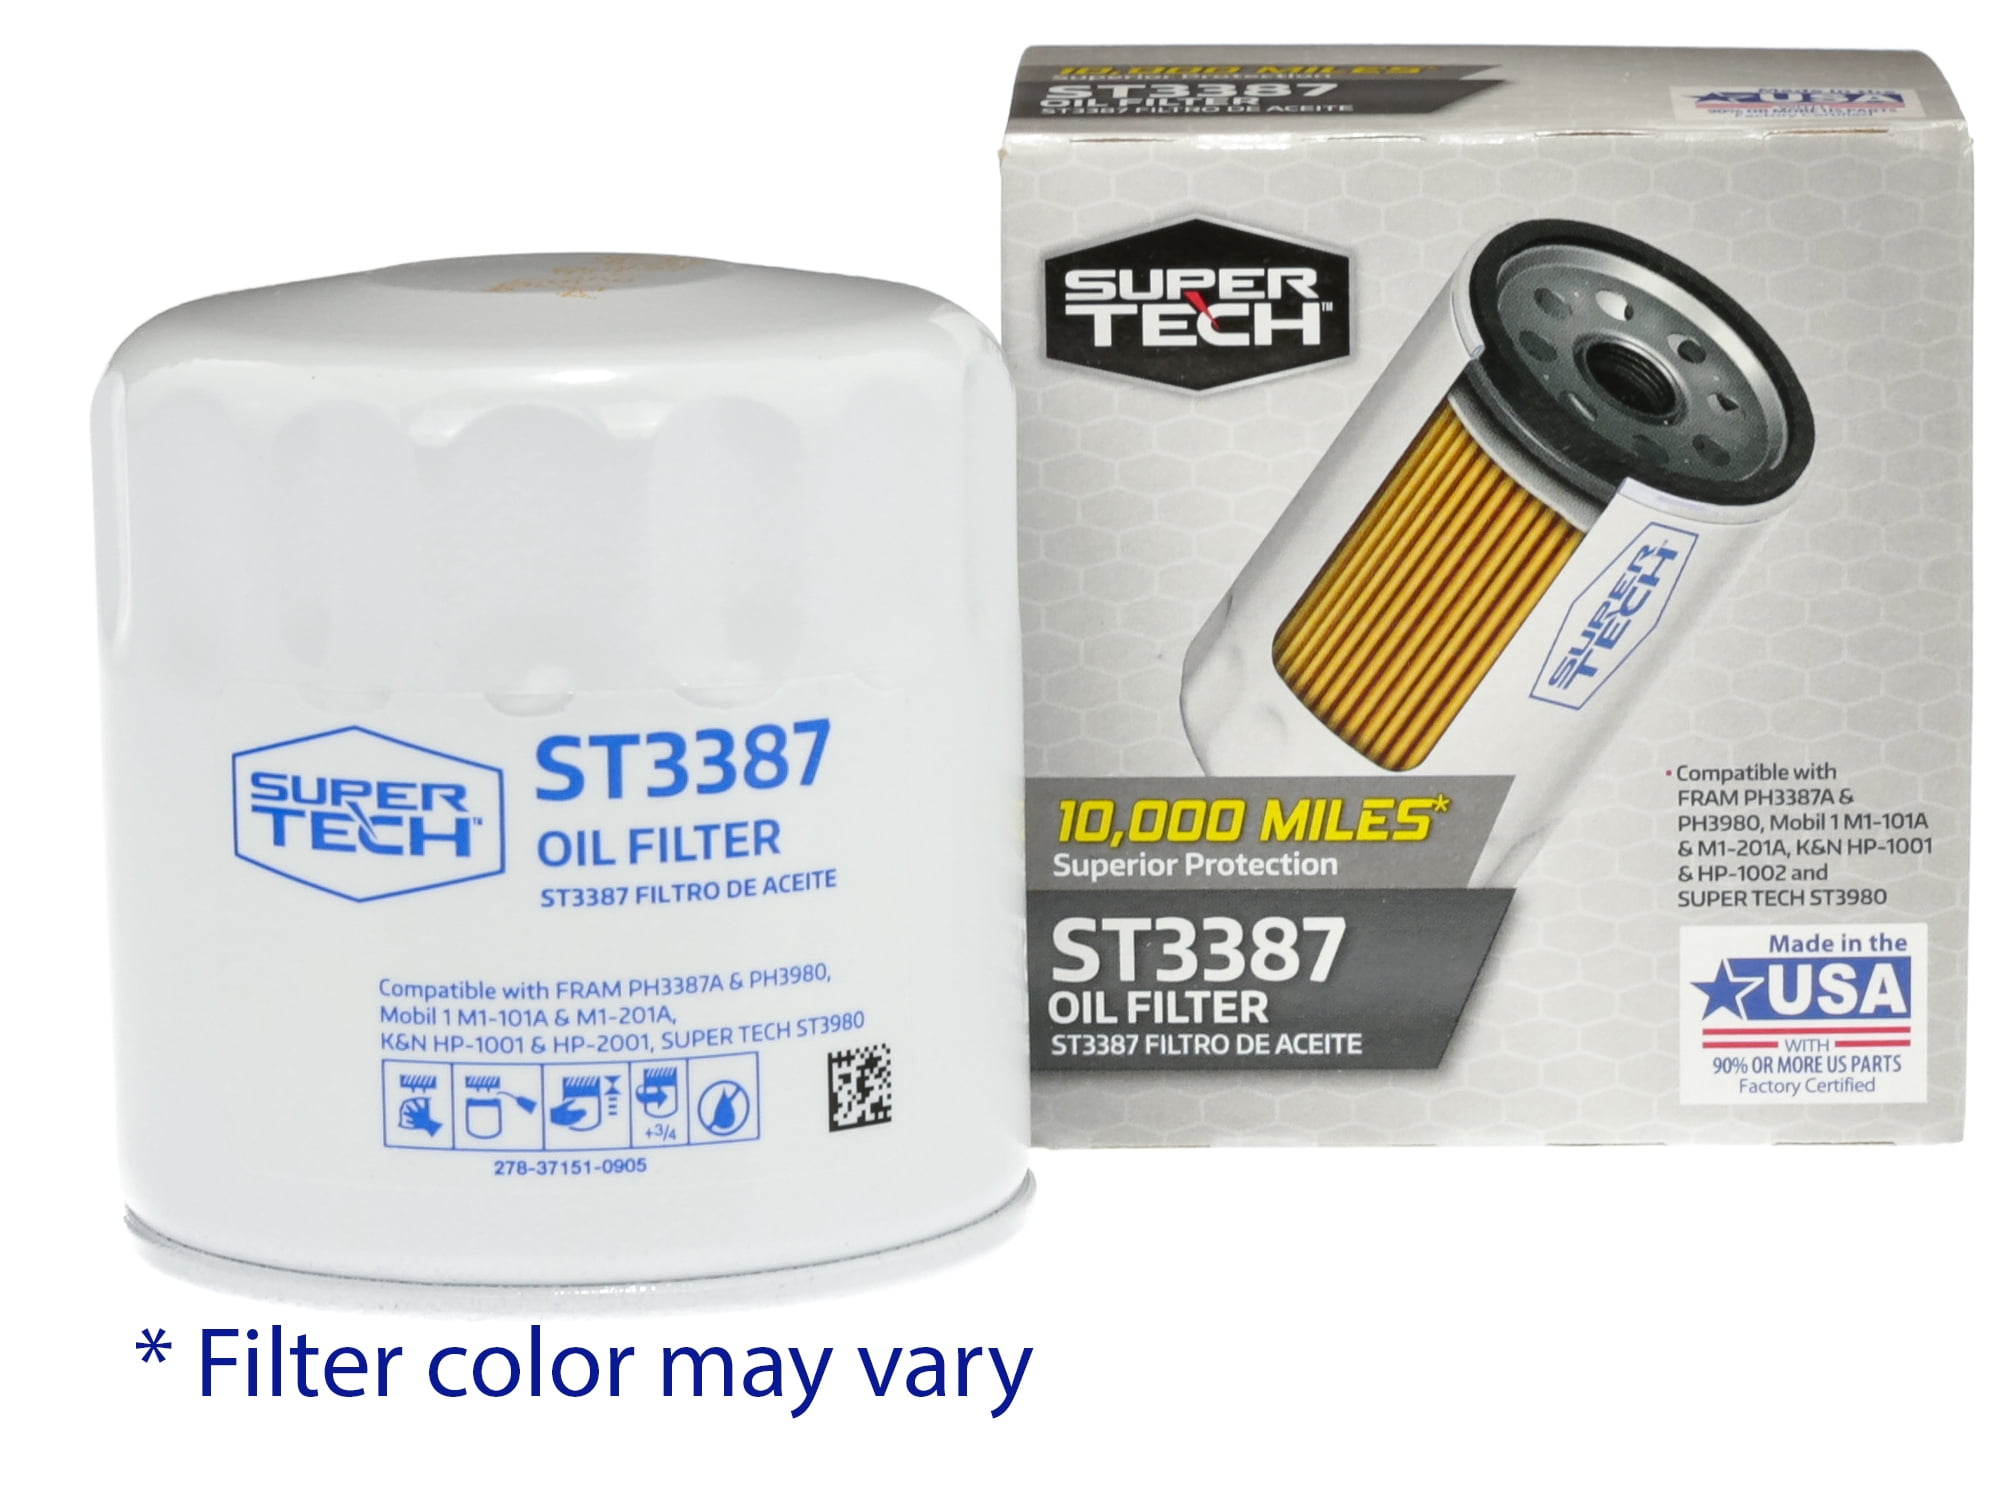 Super Tech ST3387 10K Mile Spin-On Motor Oil Filter Fits GM and Isuzu